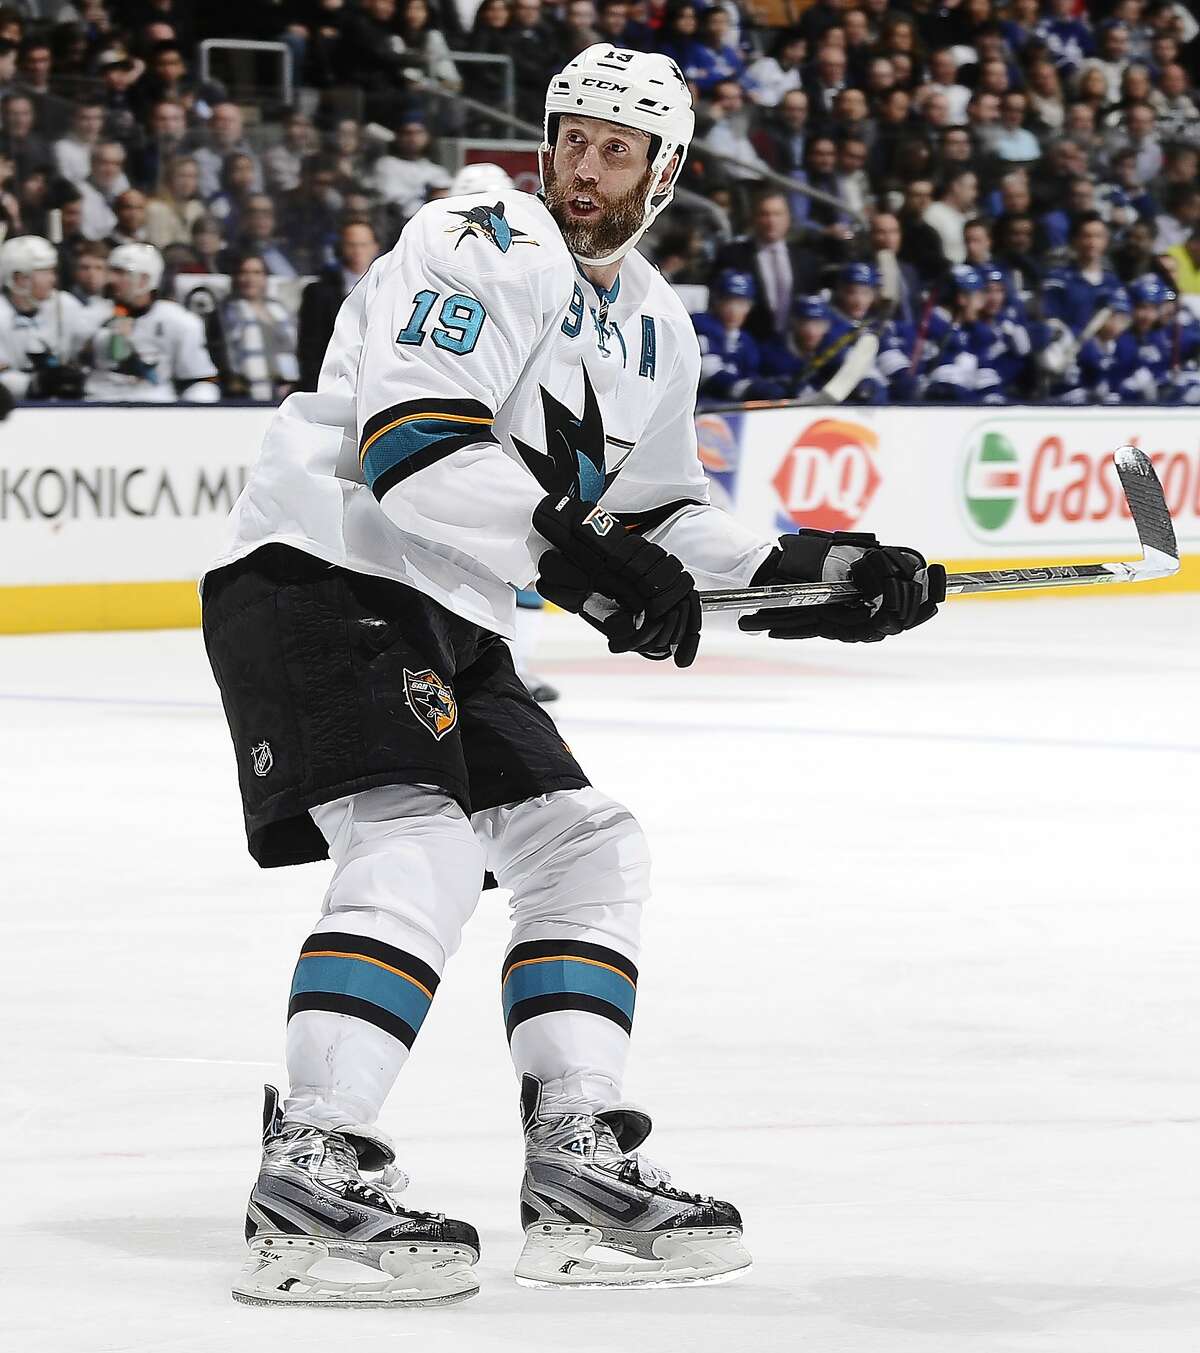 Joe Thornton 'can't wait' to get back into lineup